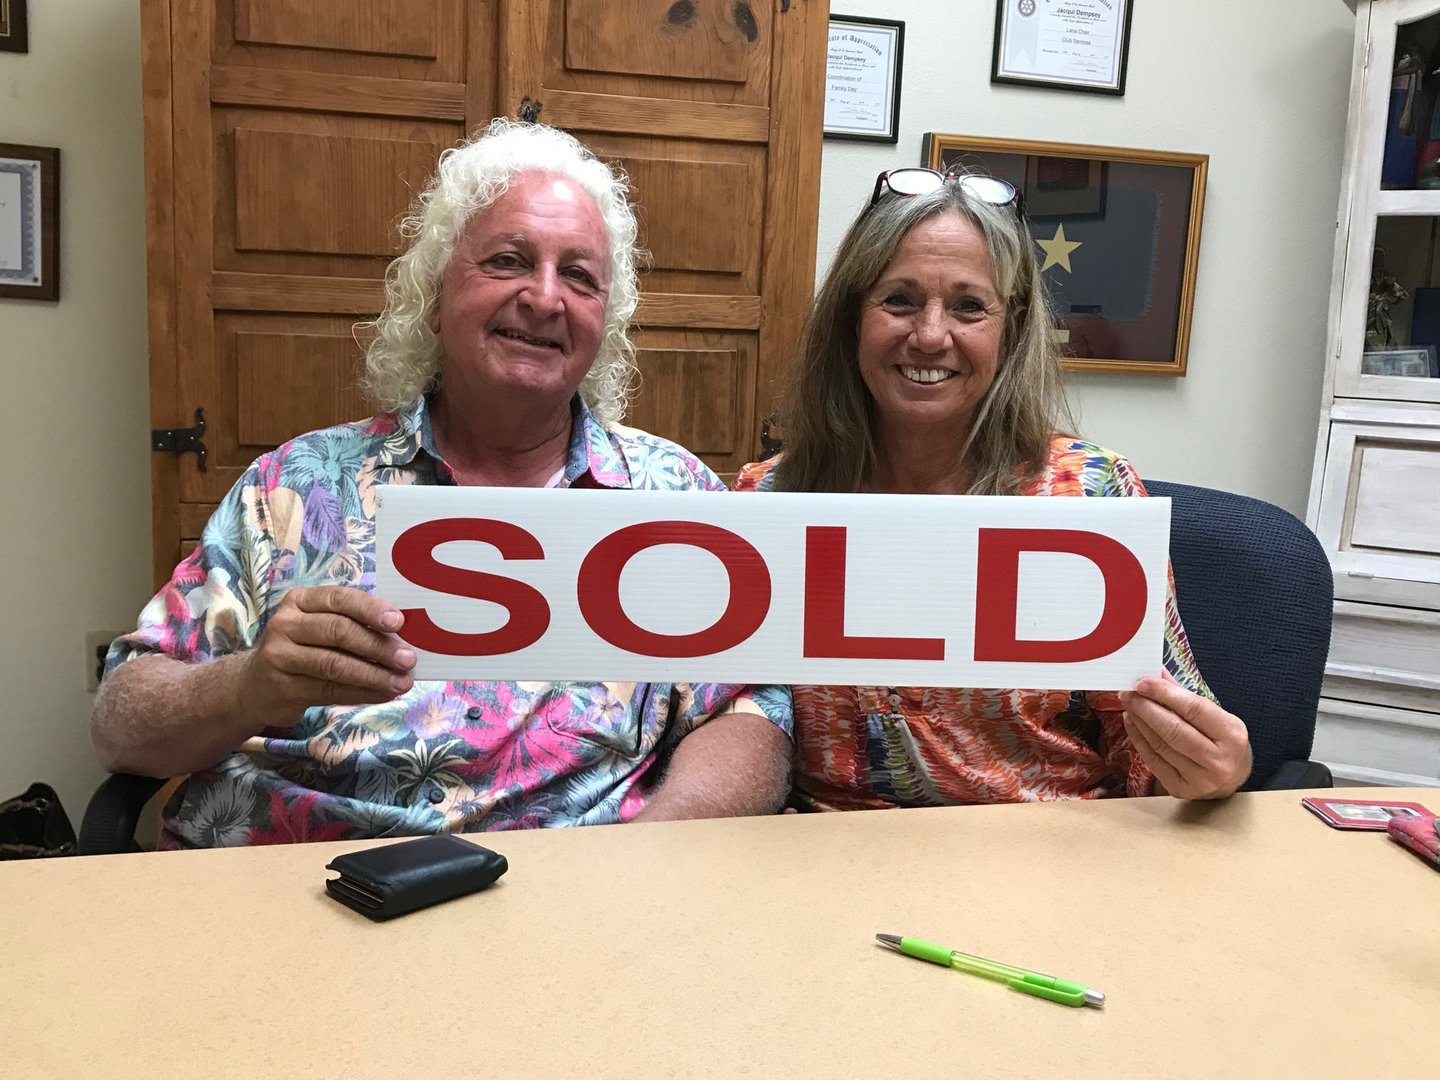  We owned a house and a condo on SPI. we contacted Dina to see our house in 2018. She did a marvelous job. She is one of the most professional, organized and hard working Real Estate agents we have ever worked with. When we decided to sell our condo 